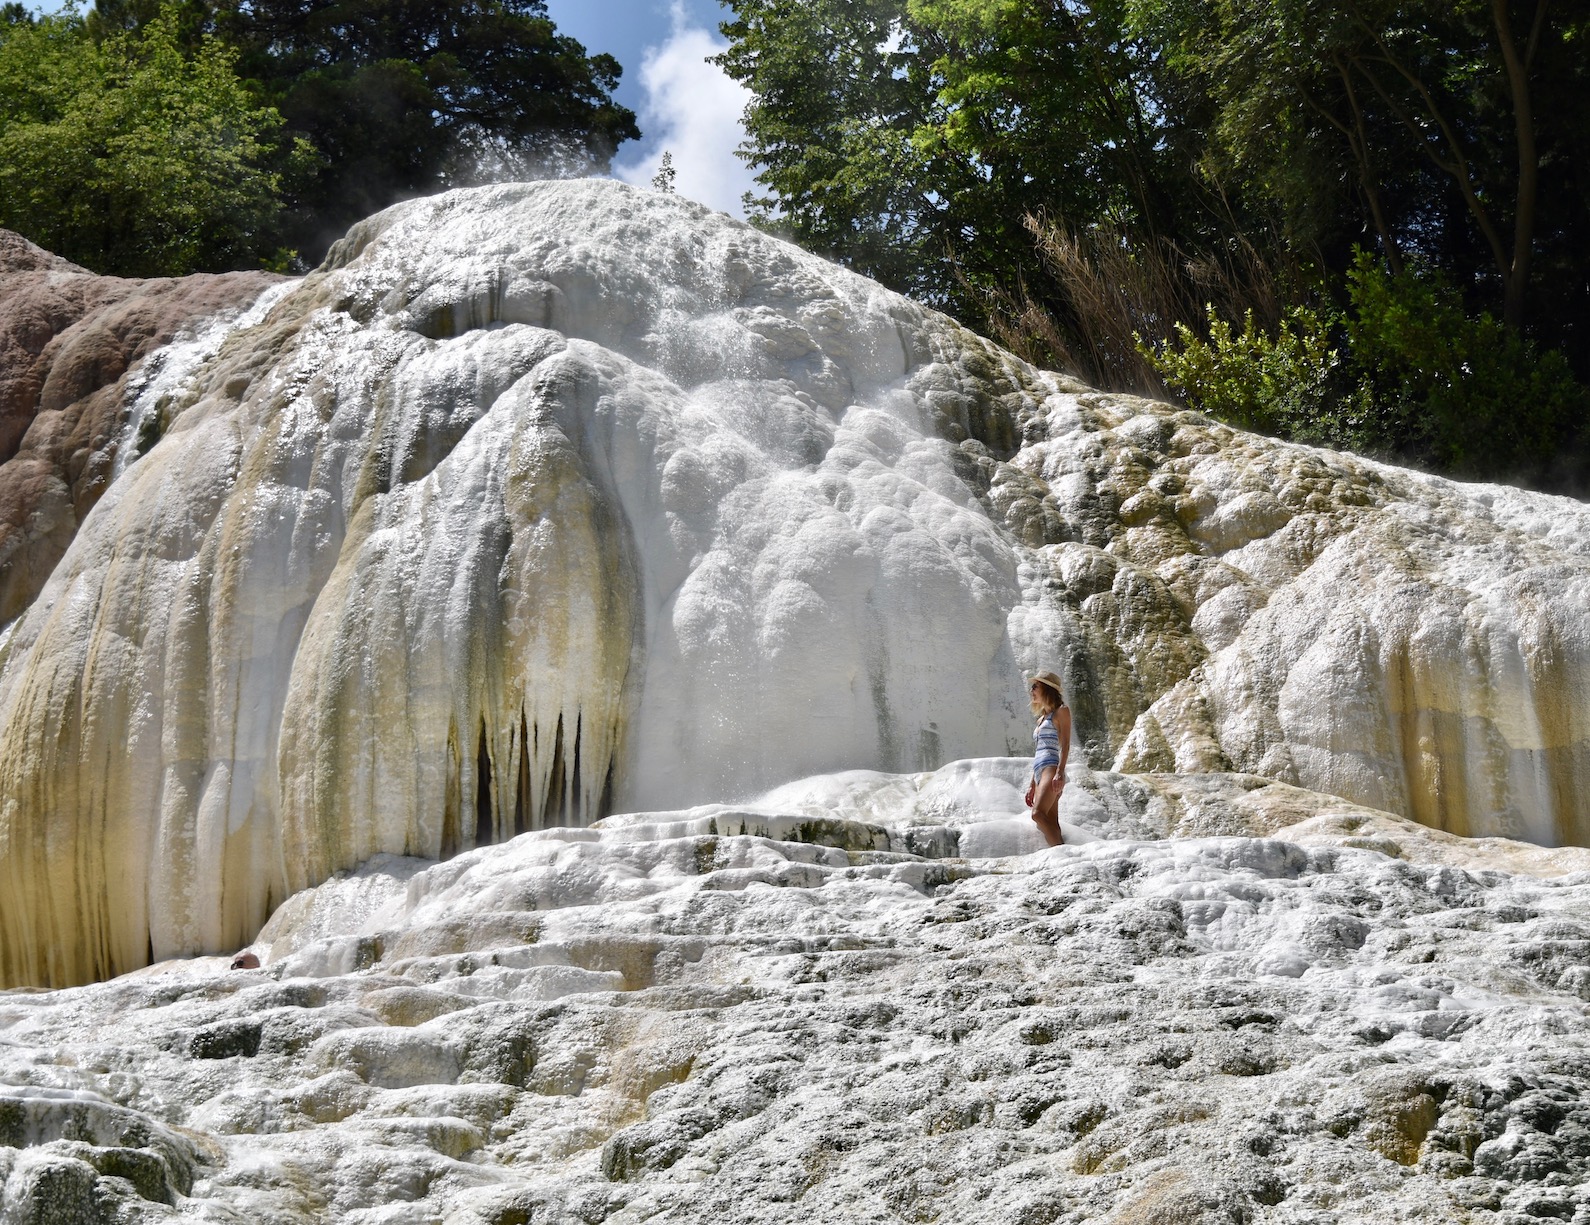 Hayley stands on the white rocks of the thermal springs at Bagni San Filippo in Tuscany